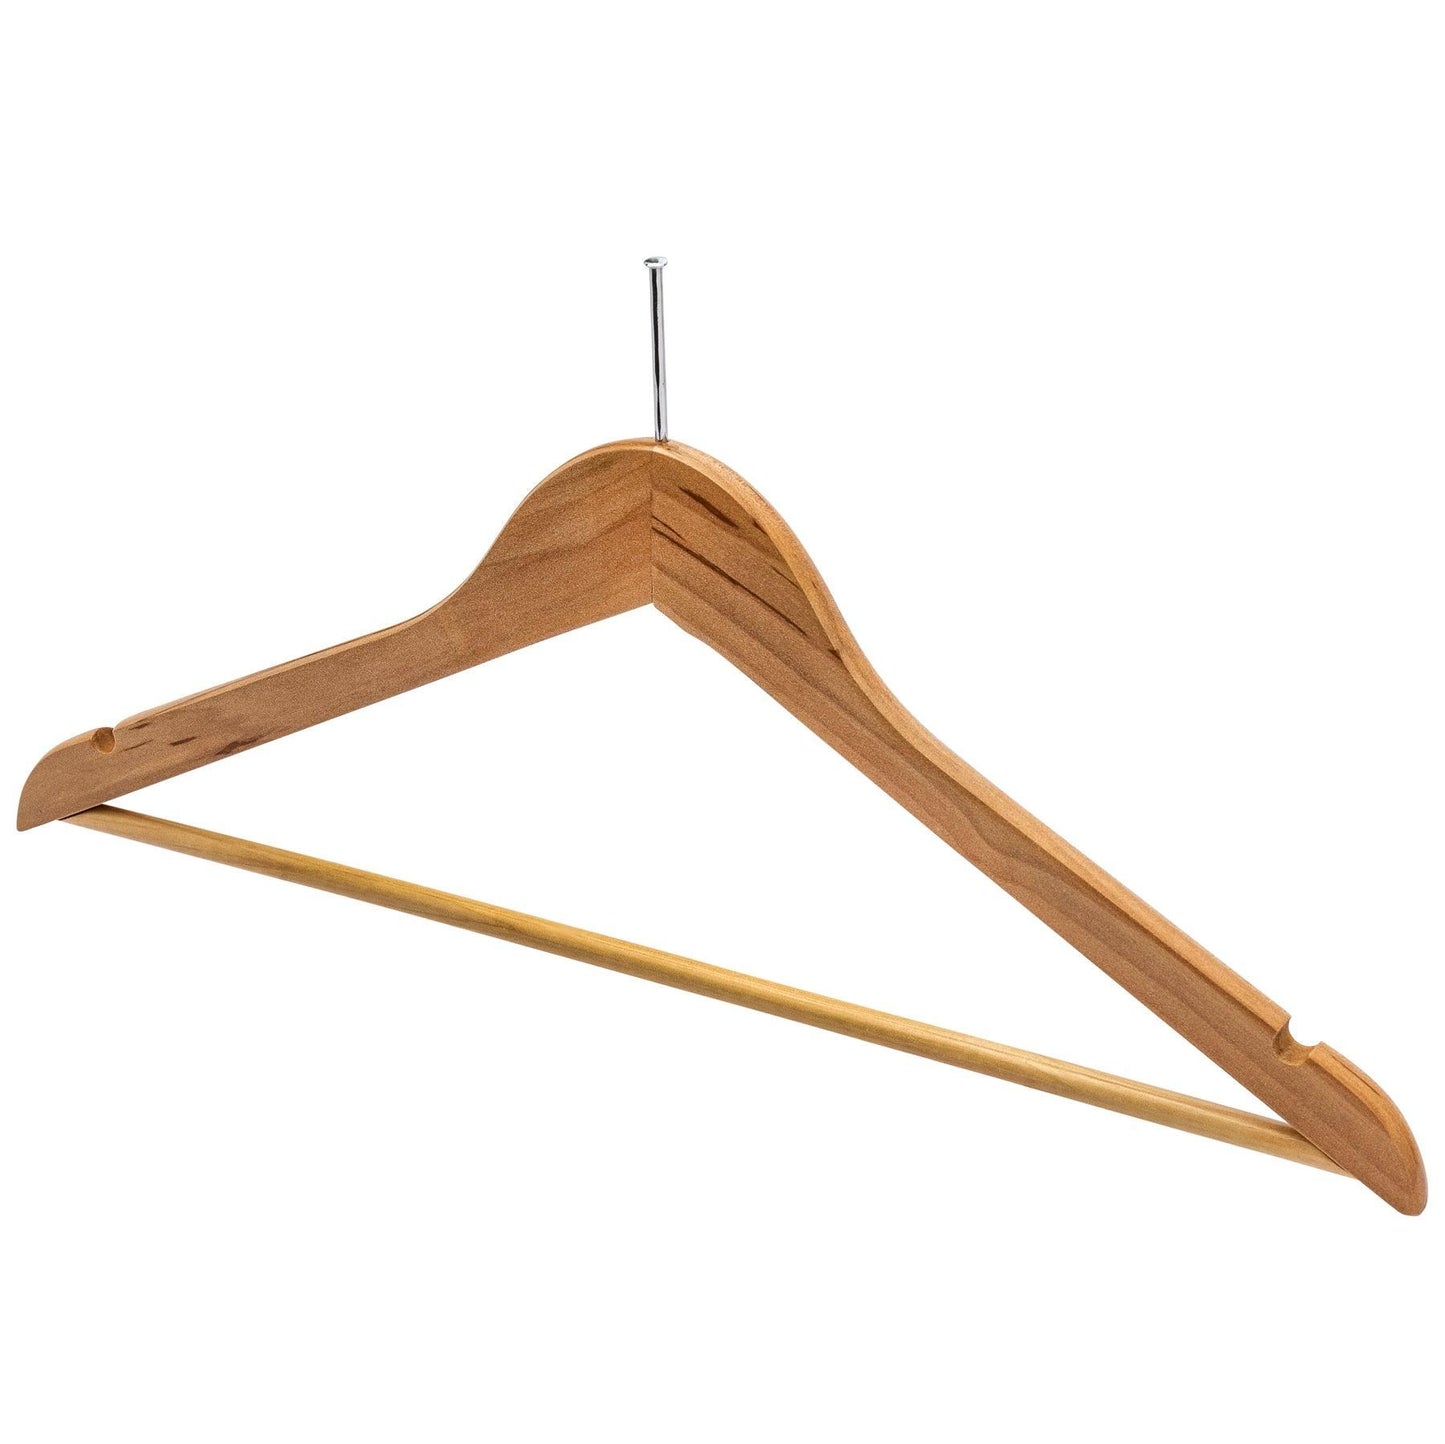 Natural Wooden Anti-Theft Coat Hanger with Bar (WITHOUT HOOK) - 43cm X 12mm thick  (Sold in 25/50/100) - Hangersforless